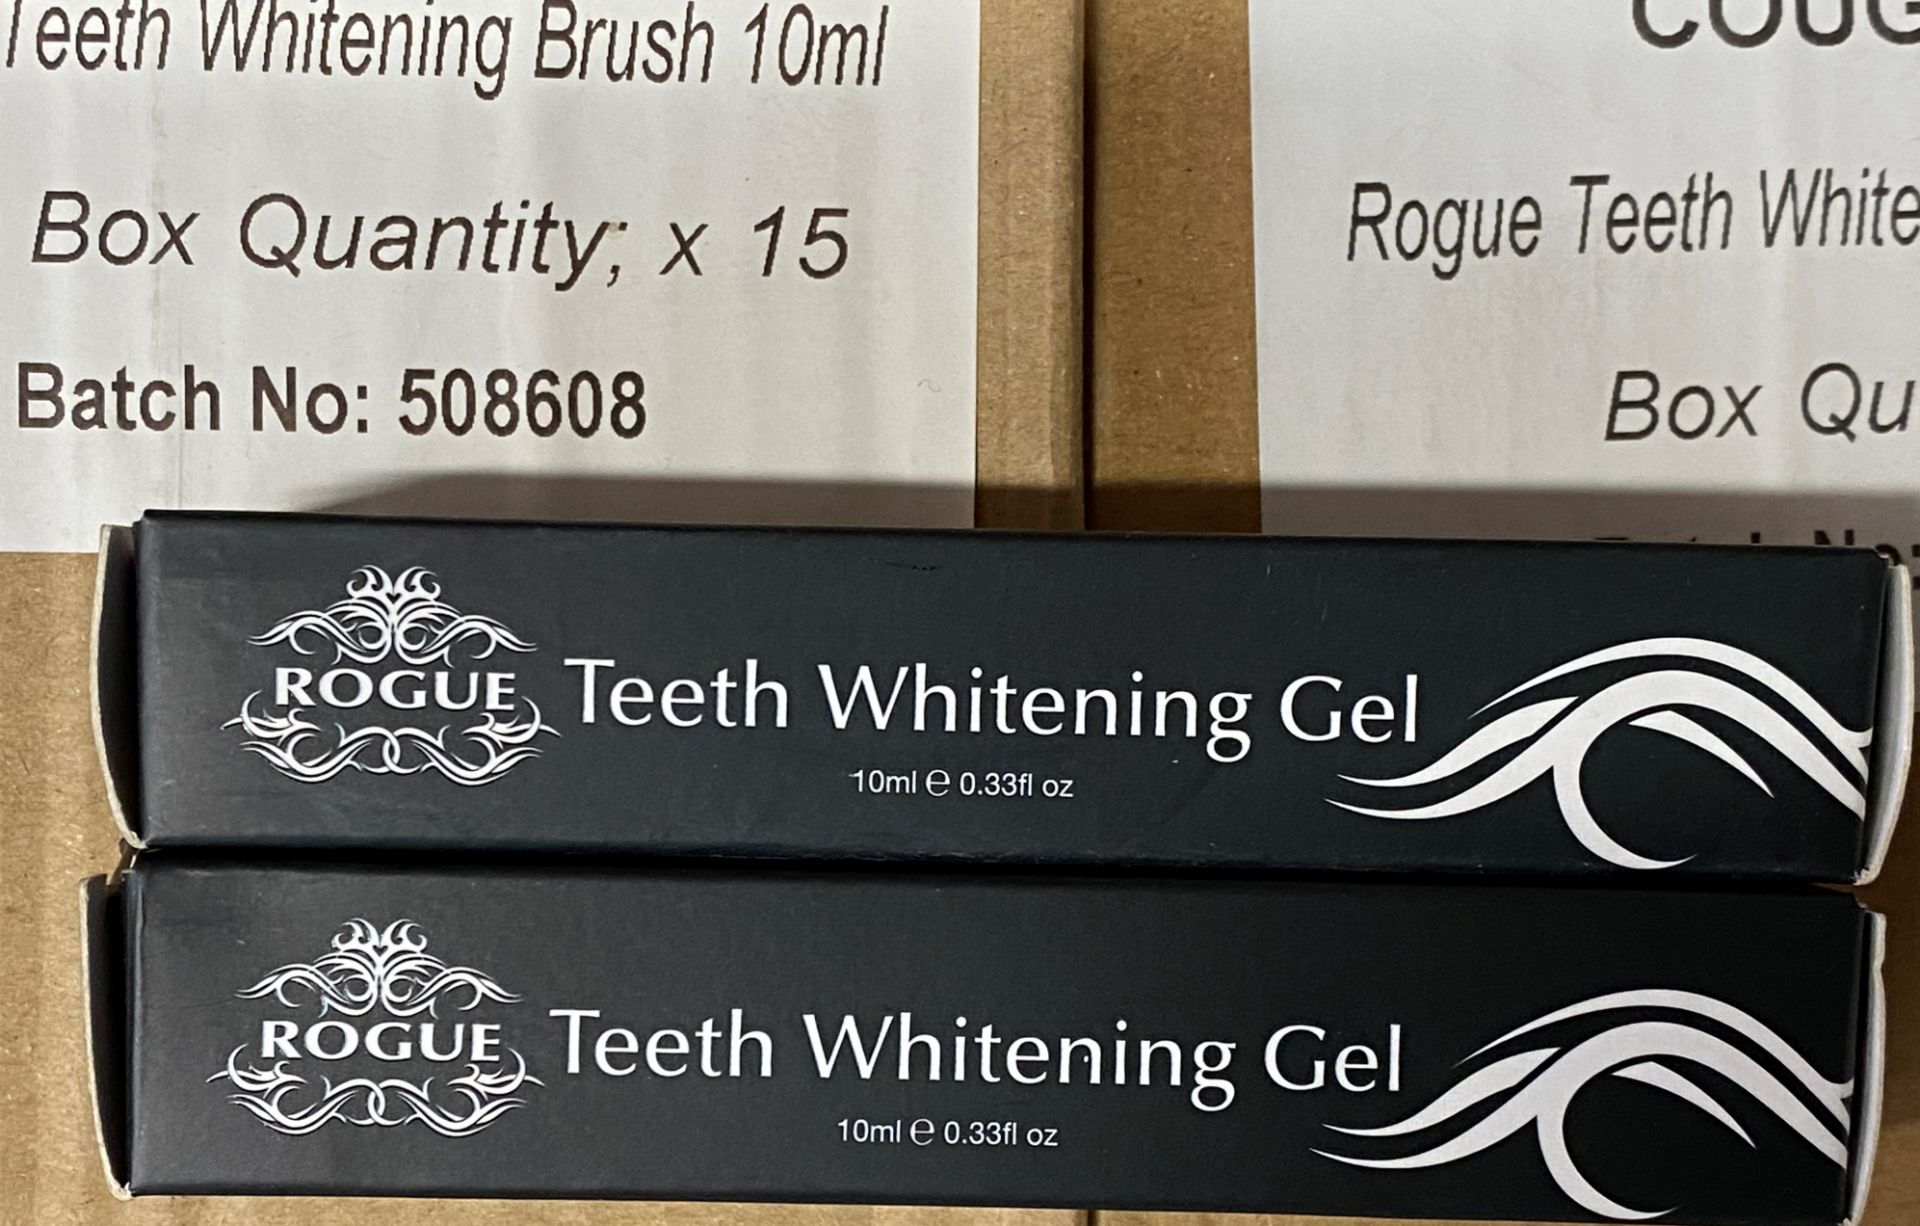 250 x 10ml tubes of Rogue Teeth Whitening Gel (Counts are approximate)